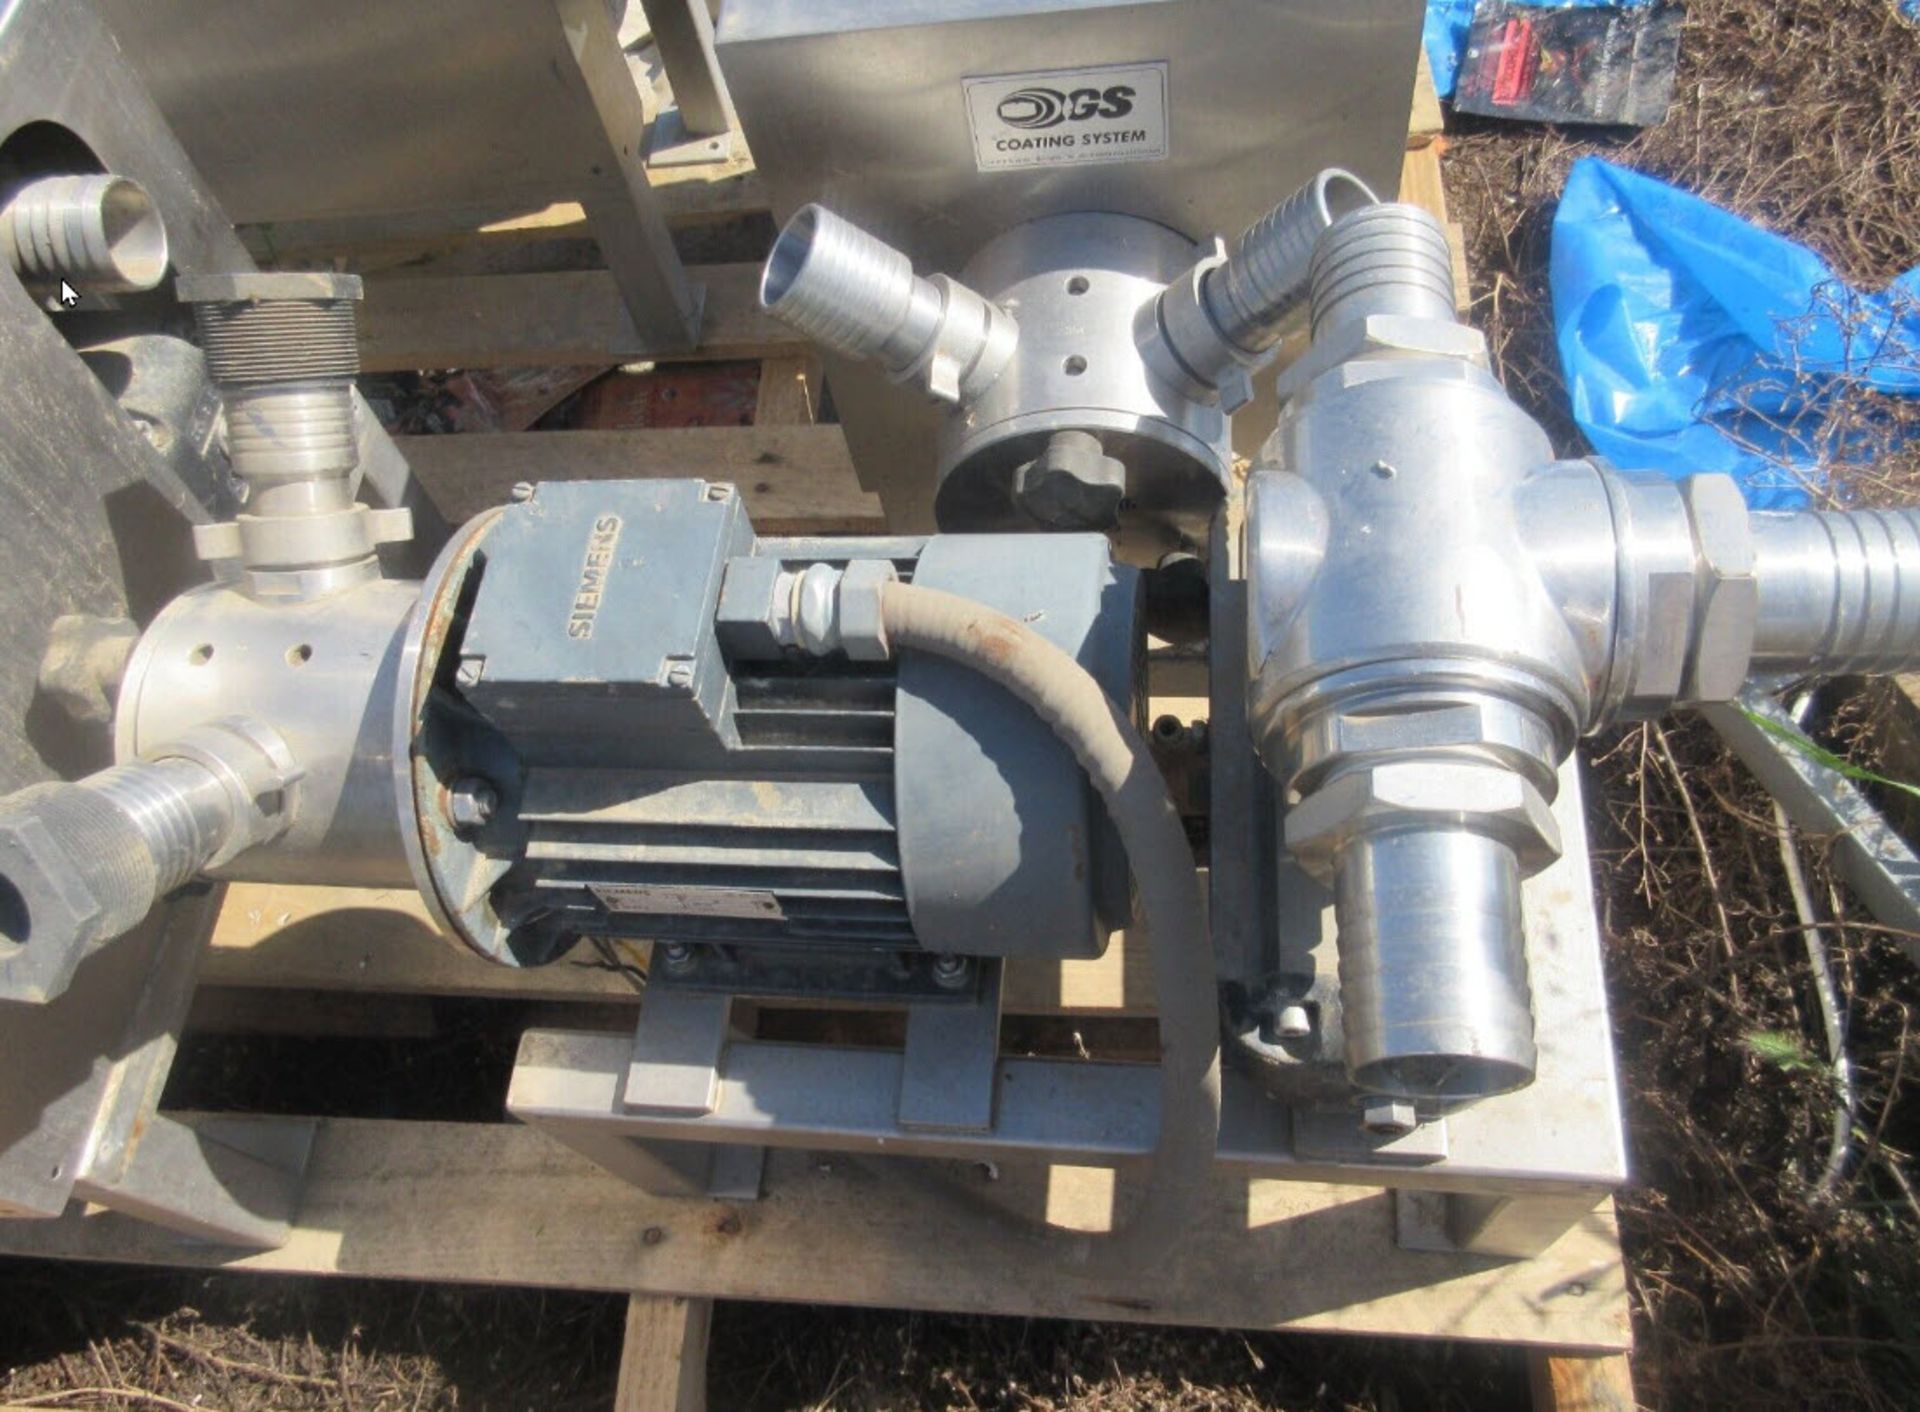 (Located in Hollister, CA) Siemens Coating System Coating Pump, Rigging Fee: $100 - Image 9 of 11